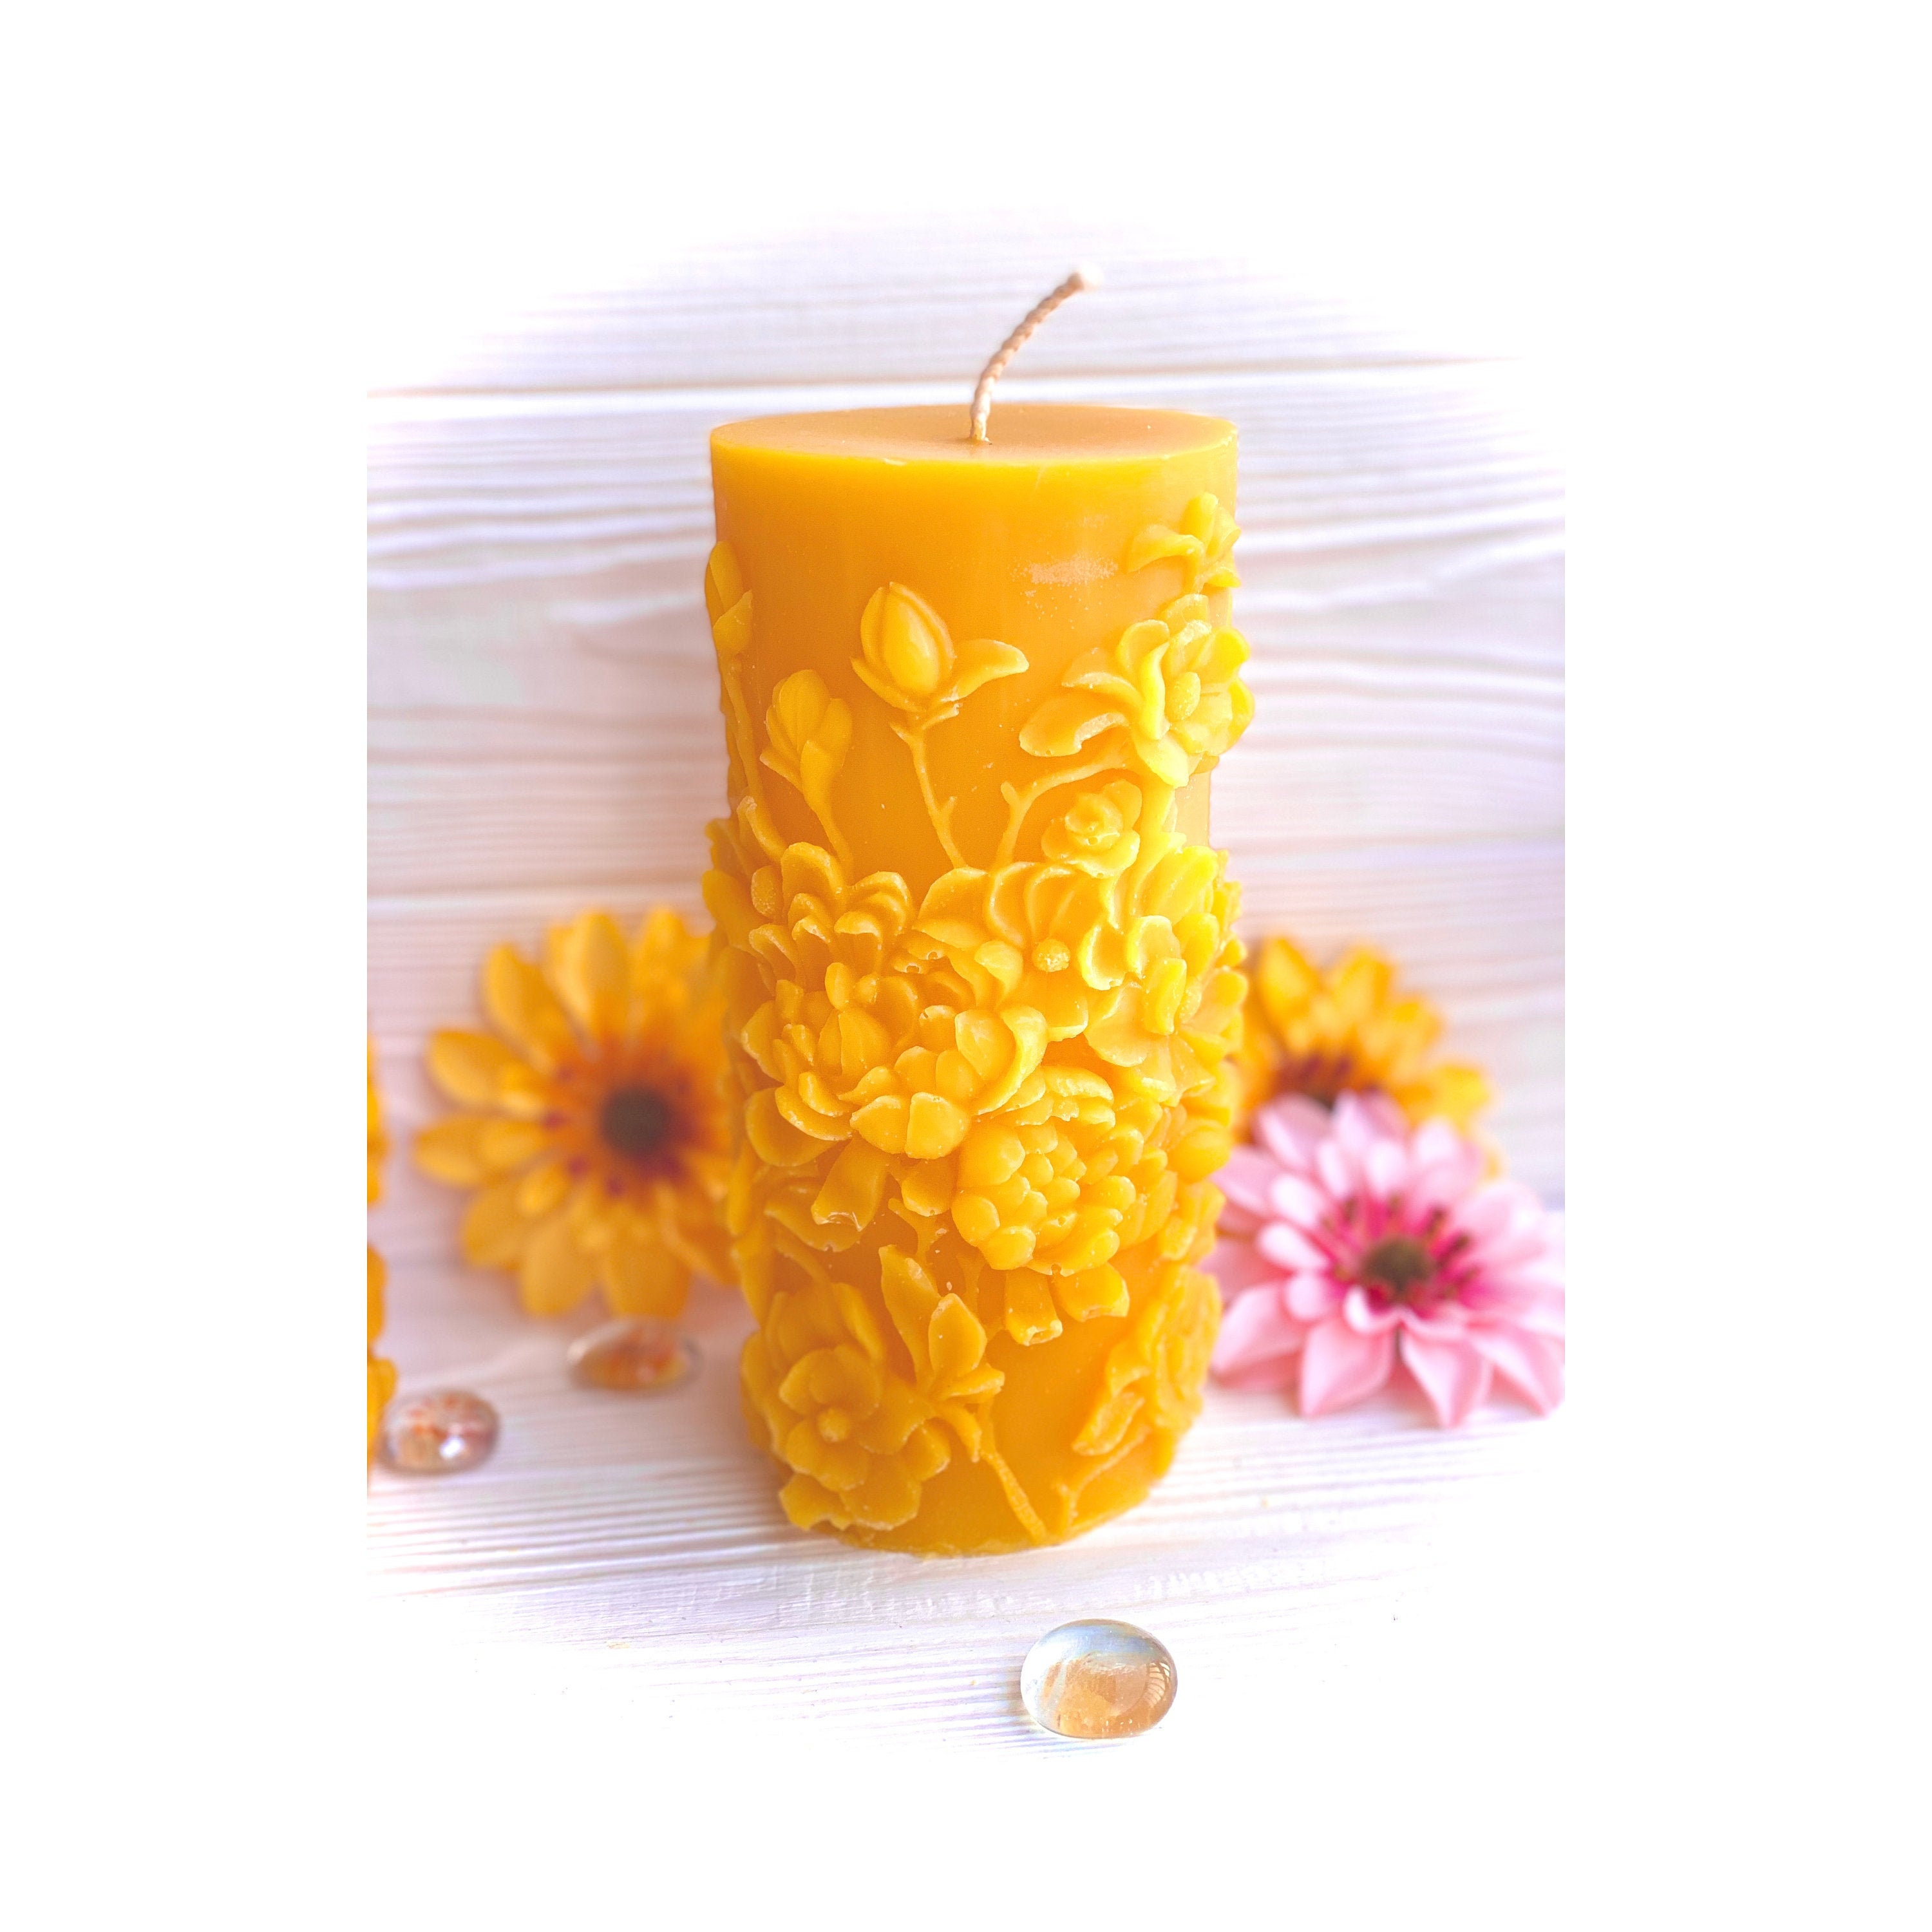 Sunflower Beeswax Candle Pure Beeswax All Natural Aesthetic 